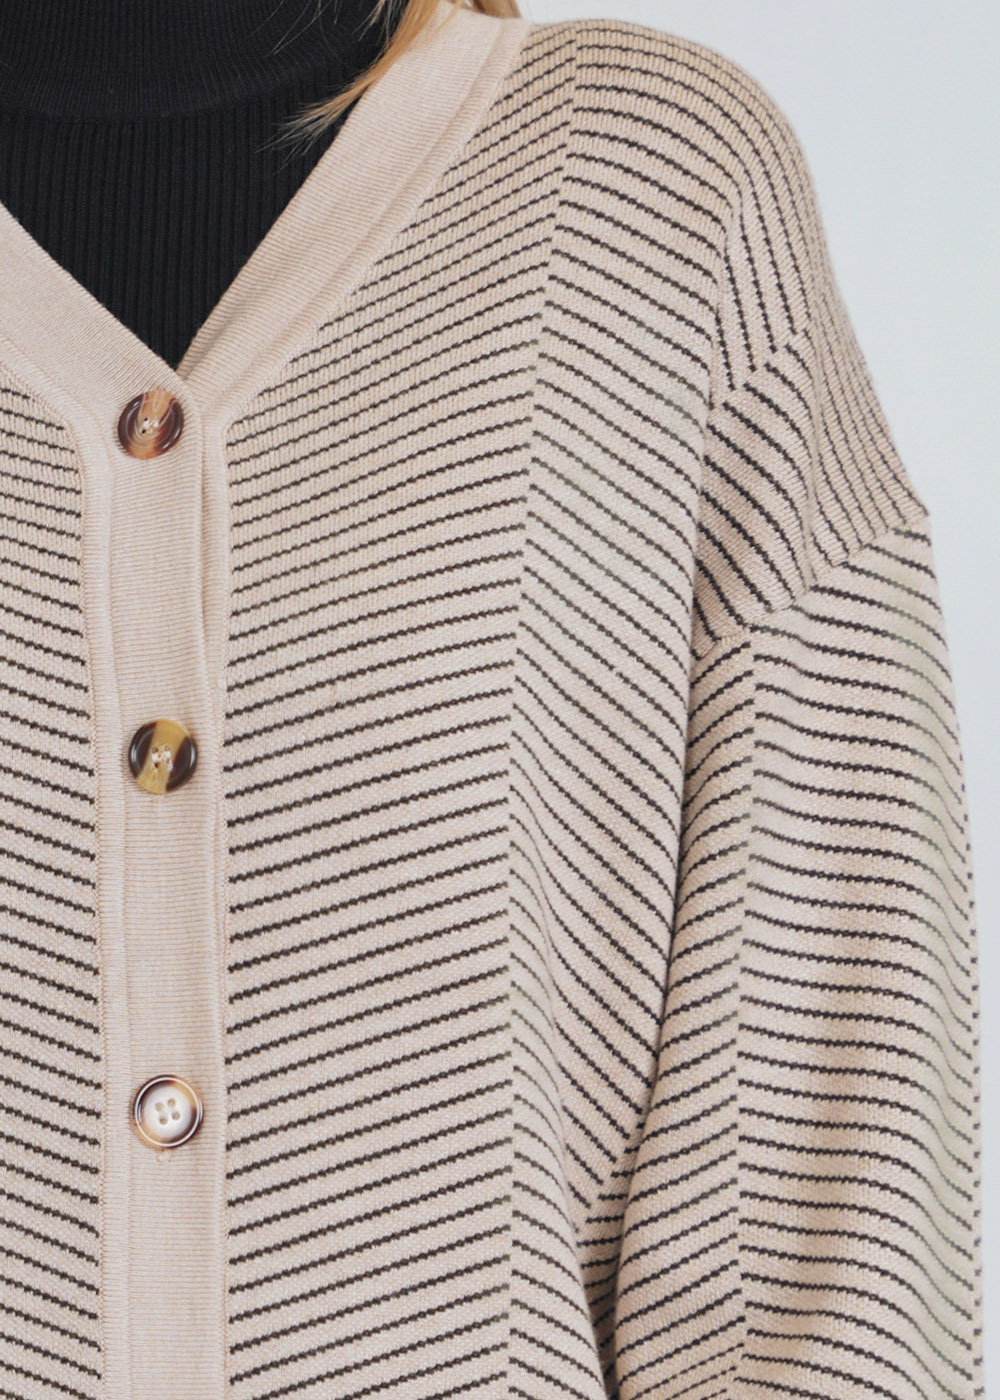 Cream Cardigan with Buttoned Front & Subtle Stripes